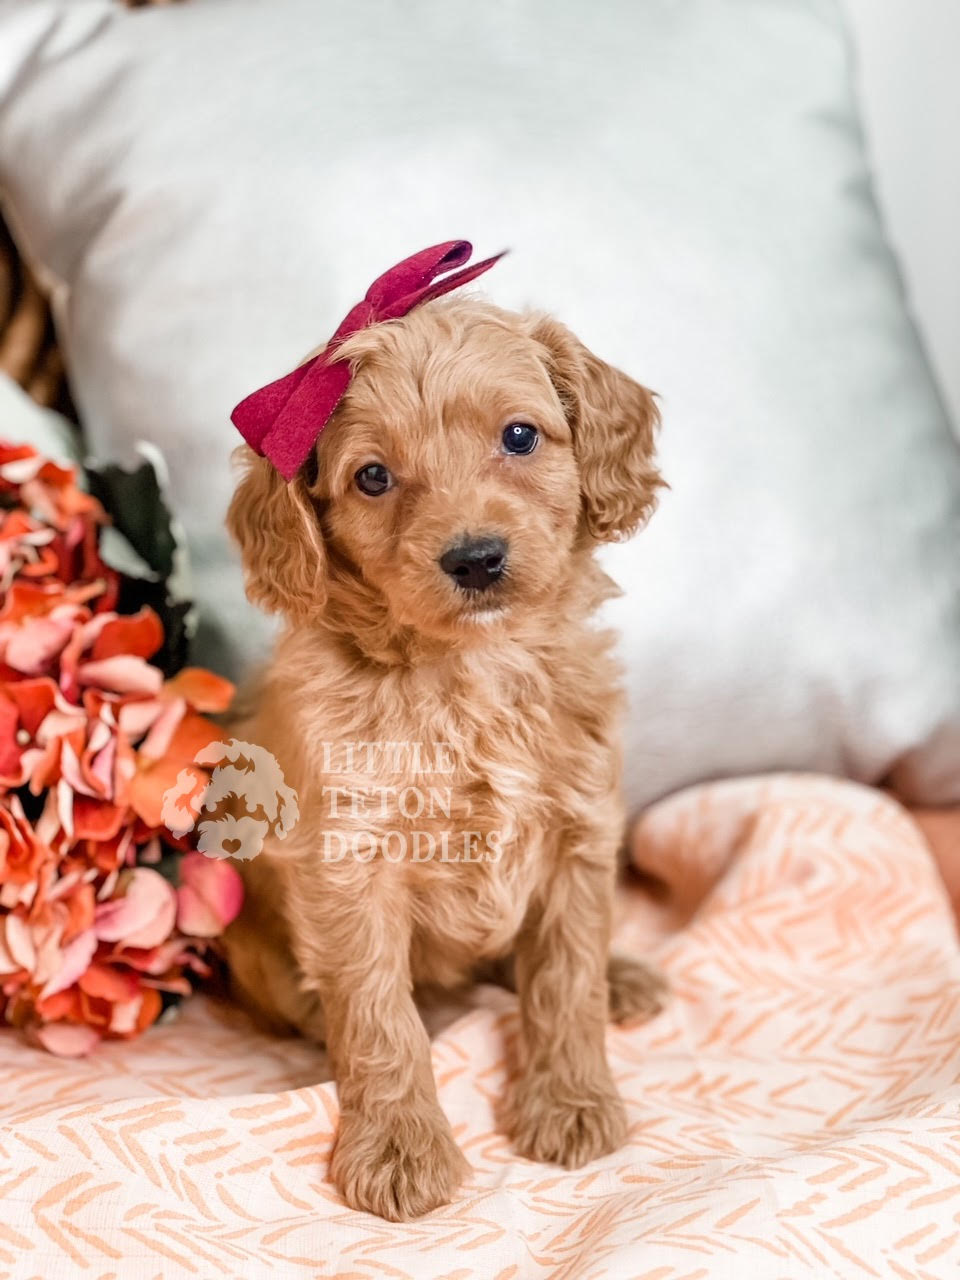 A tiny brown puppy with a red bow adorably perched on a bed, looking up with innocent eyes.